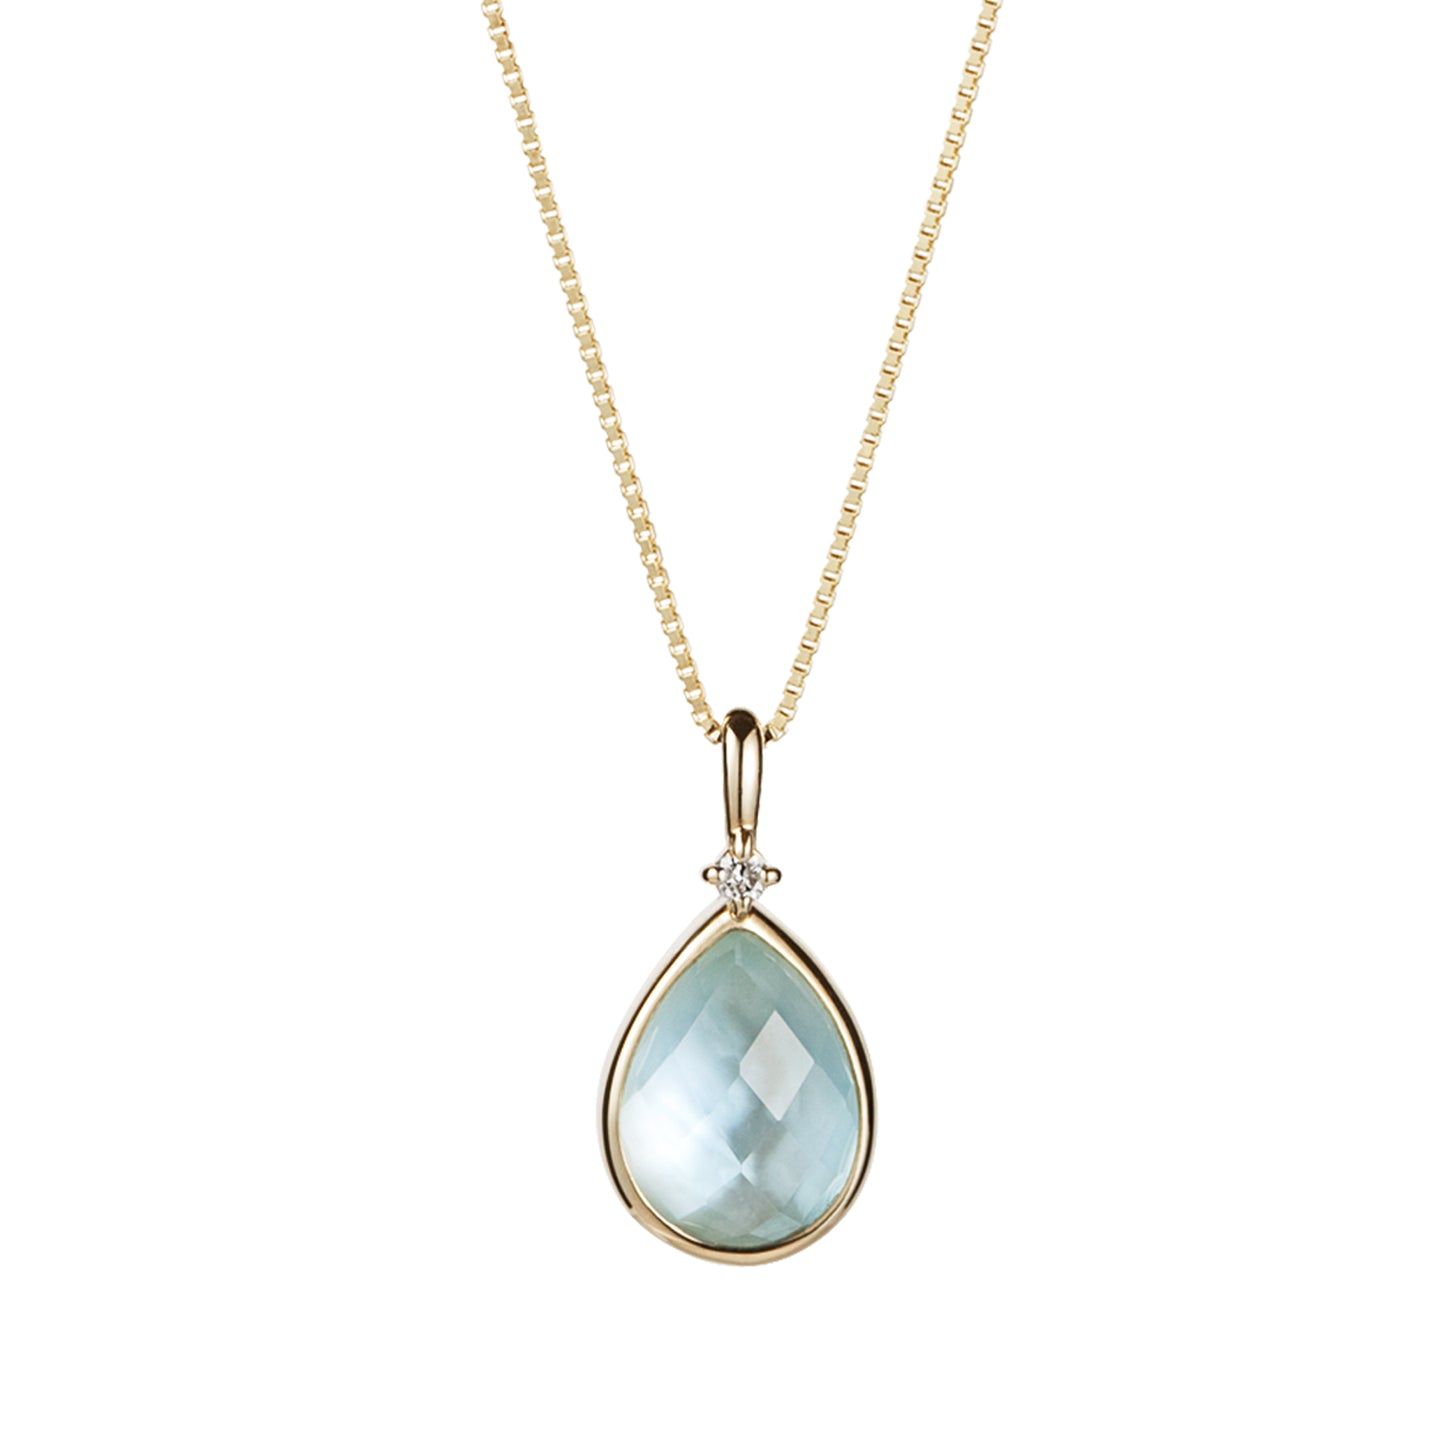 10K Yellow Gold Drop Candy Necklace - Product Image